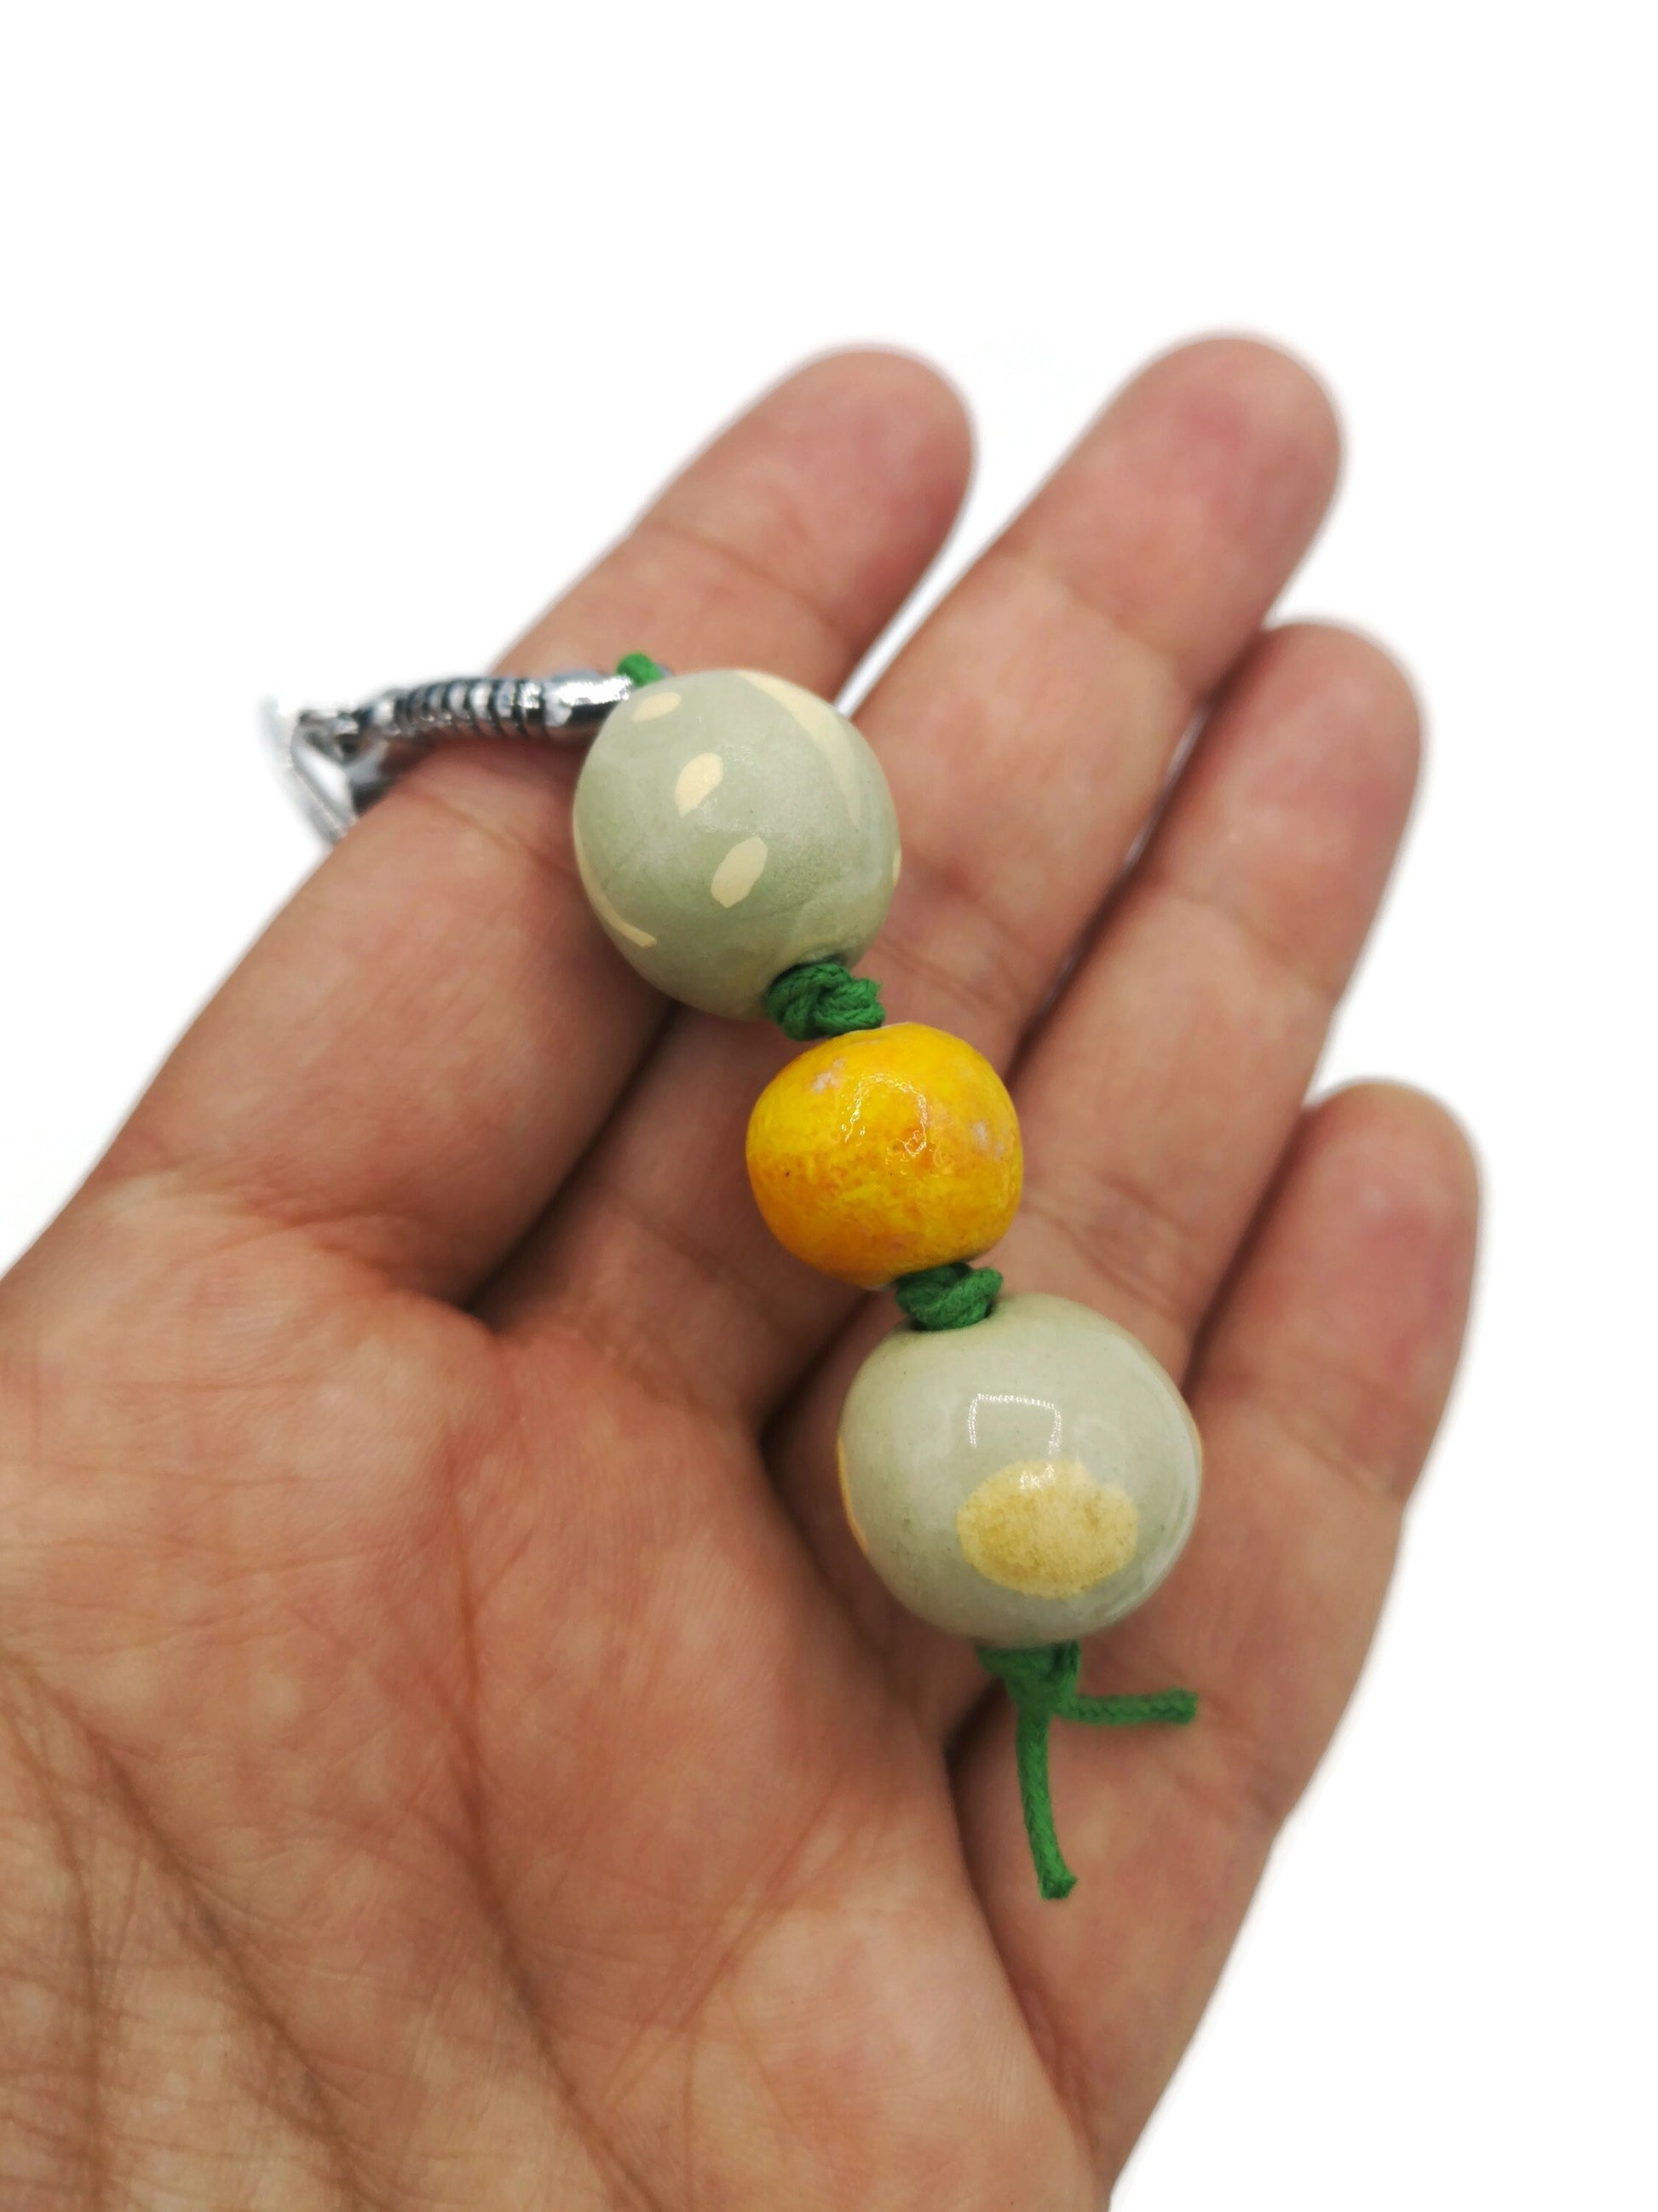 Handmade Ceramic Beaded Keychain For Women, Green And Yellow Unique Accessories For Her, Stocking Stuffers Ideas For Adults, Best Sellers - Ceramica Ana Rafael